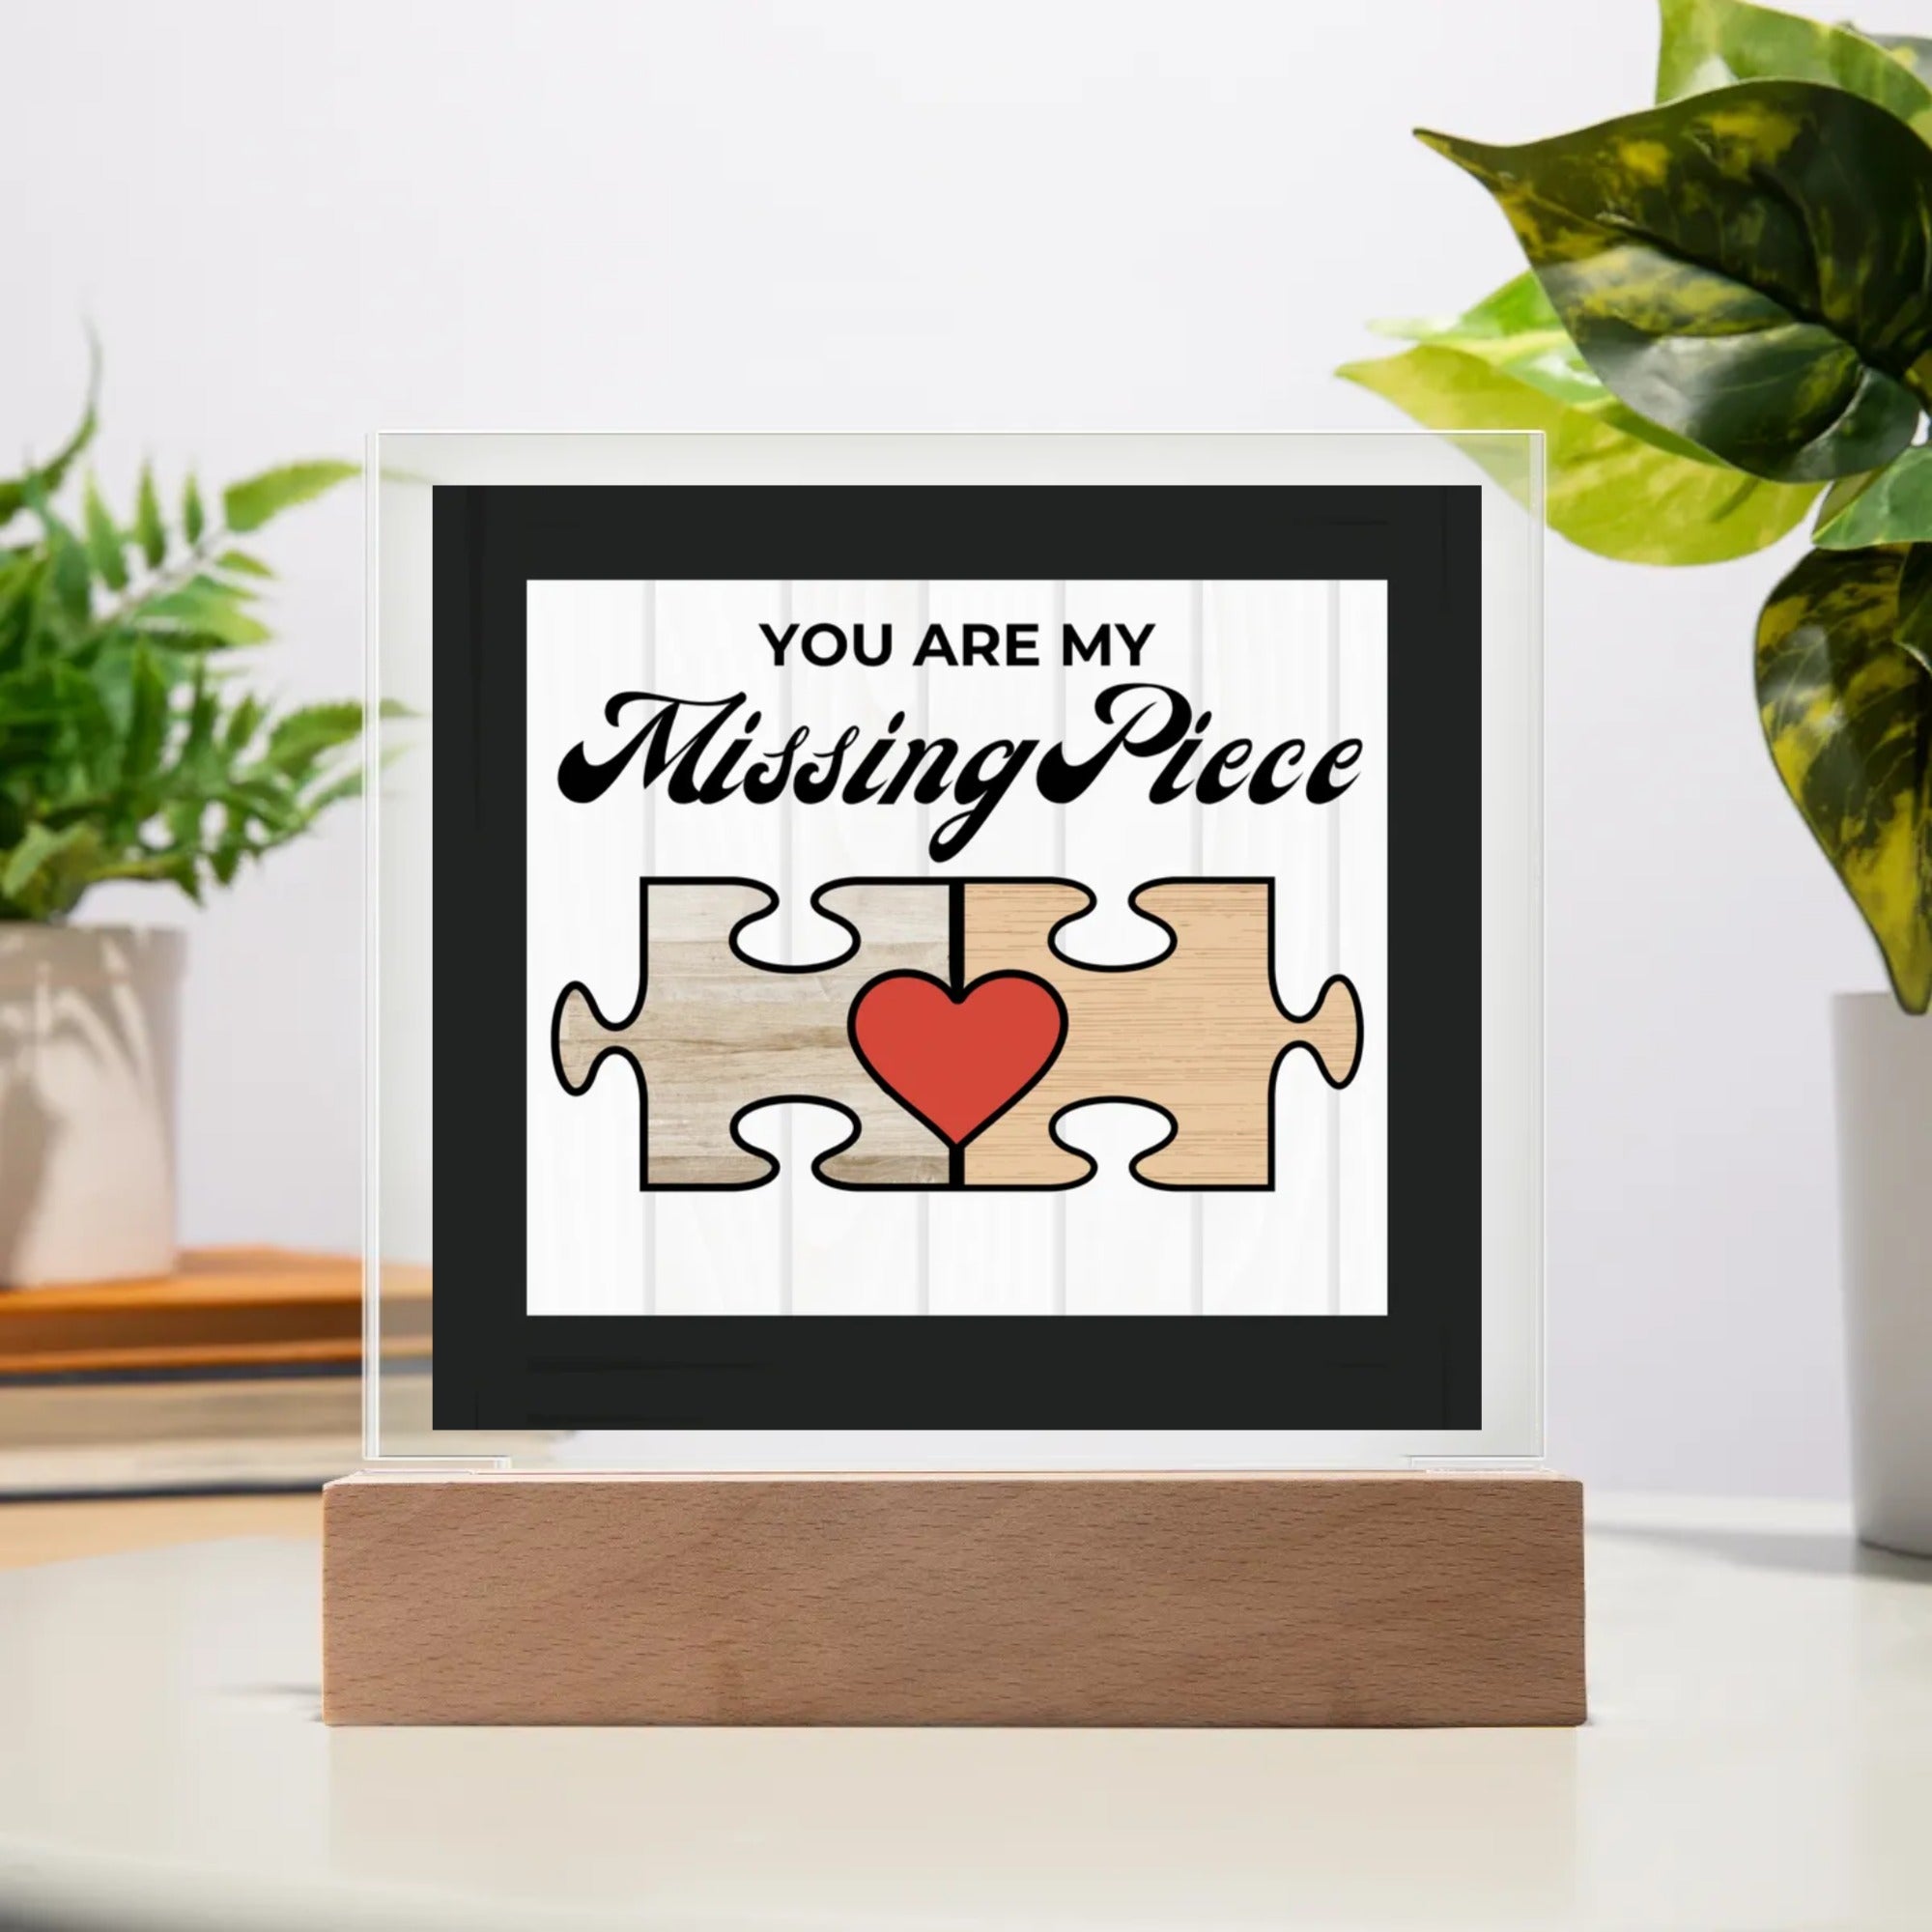 YOU ARE MY MISSING PIECE | PERSONALIZED ACRYLIC PLAQUE | LOVE GIFT